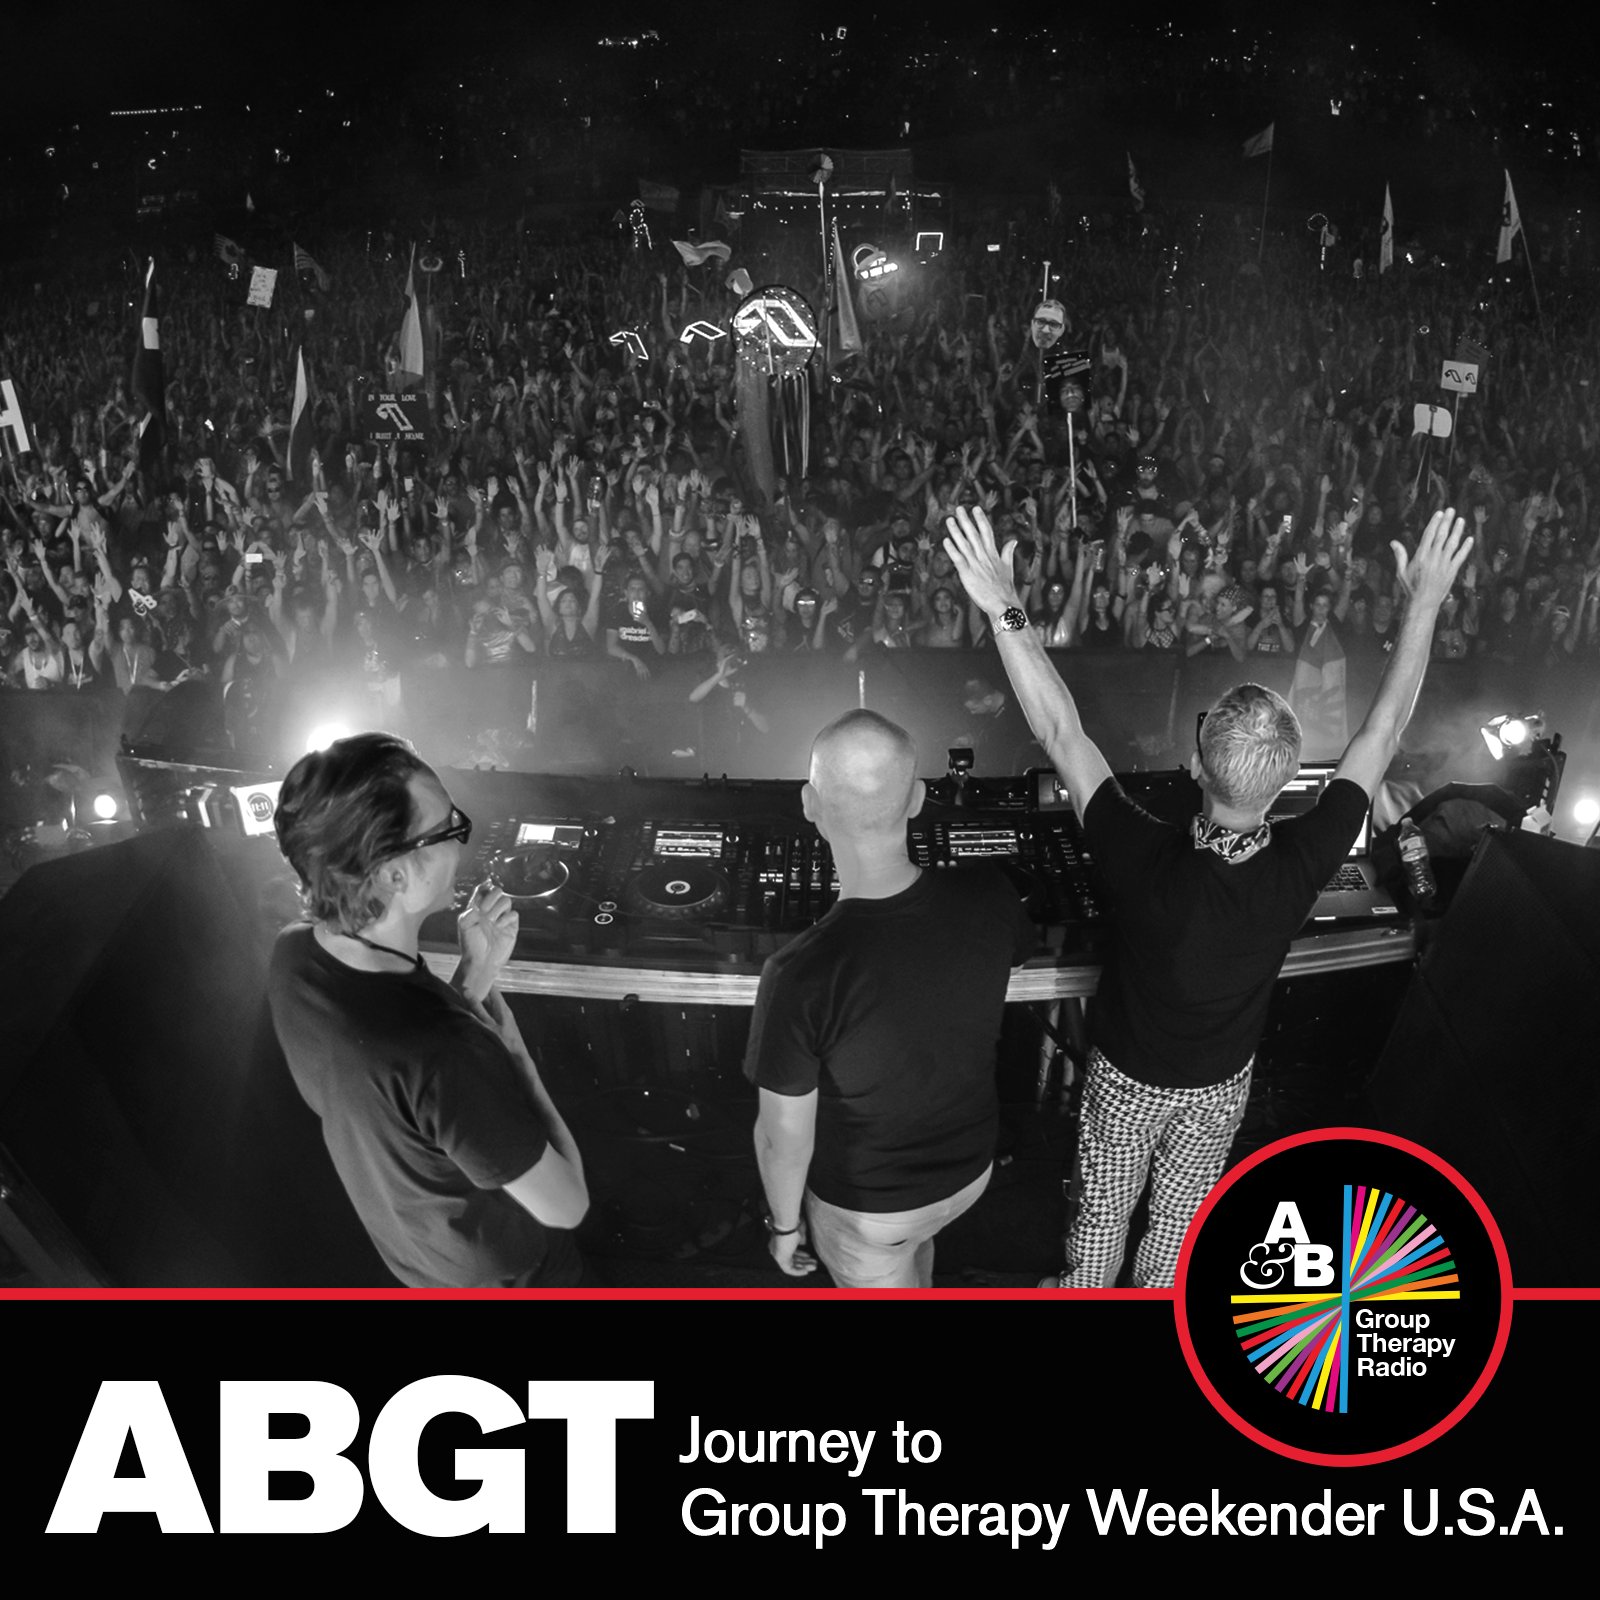 Group Therapy Journey To ABGT Weekender (22.07.2022) with Above & Beyond